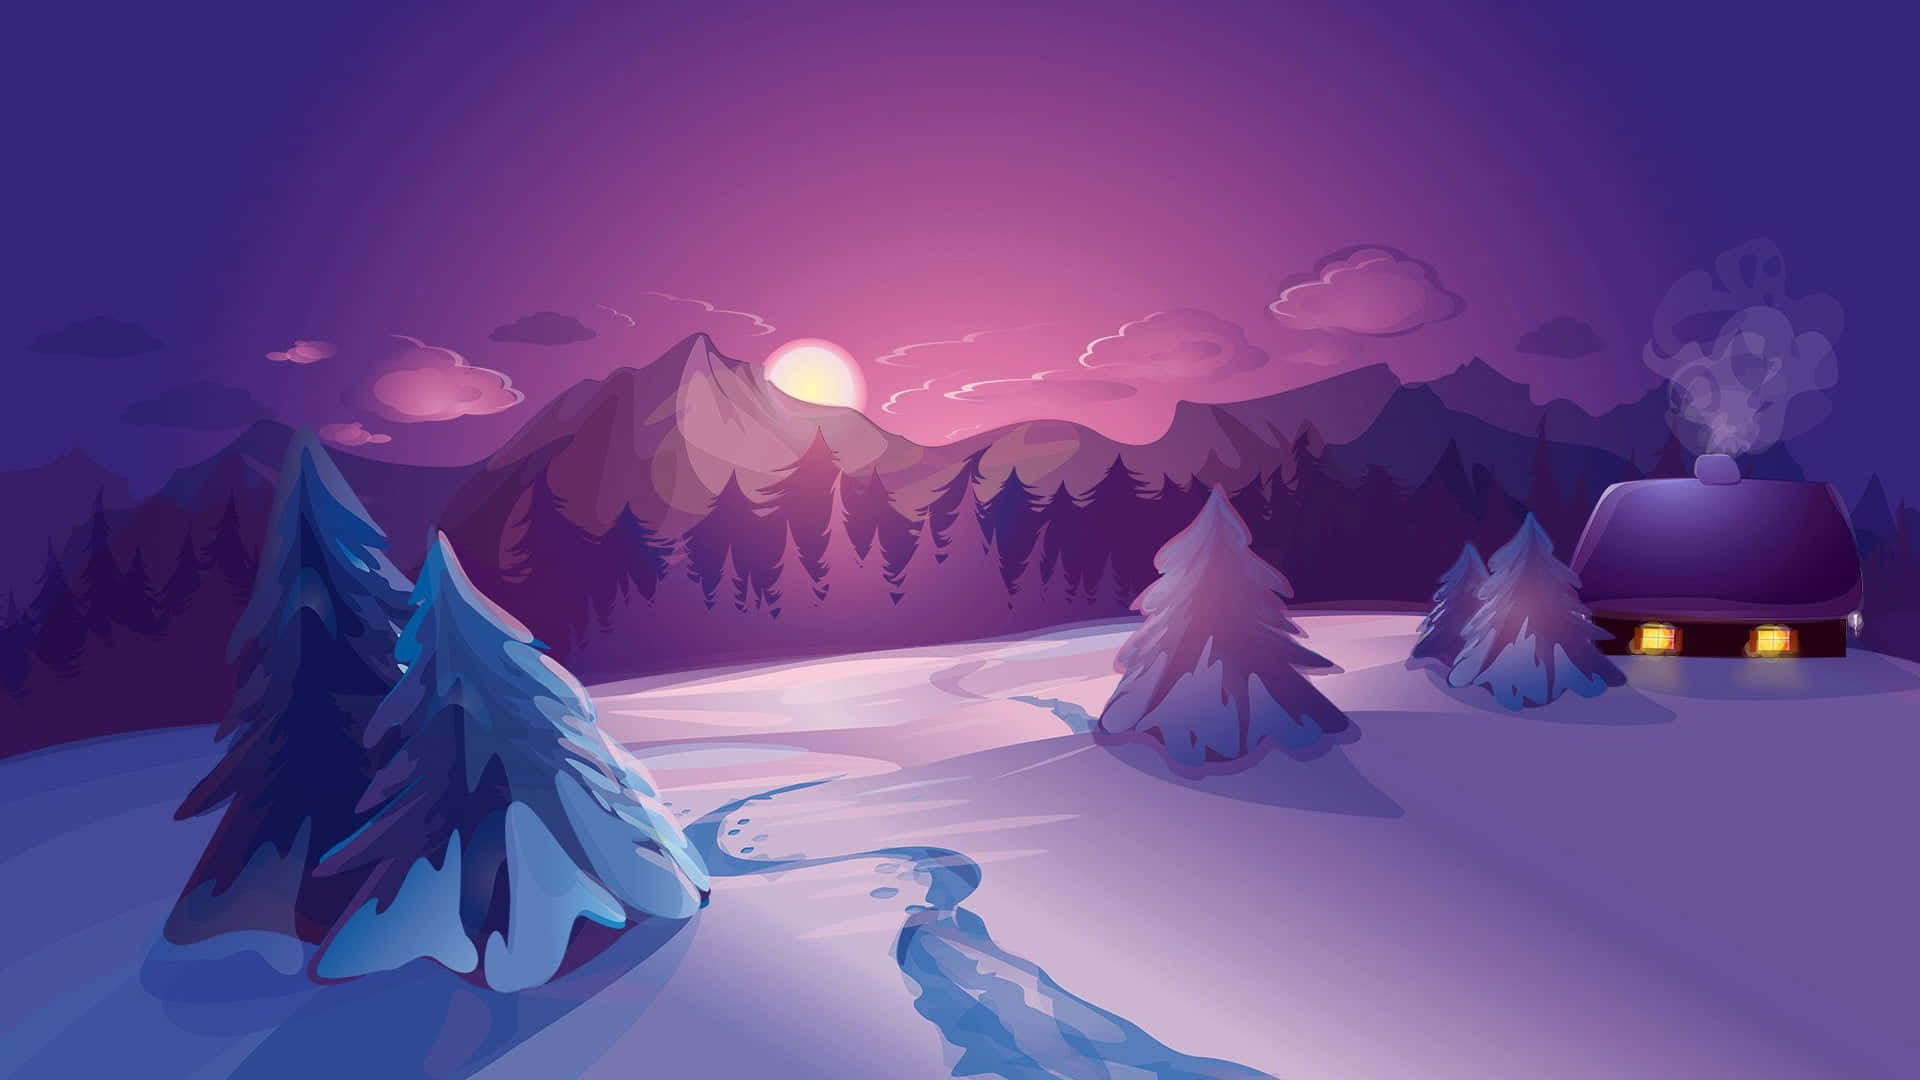 "Soak in the beauty of the snow-capped mountain sunset" Wallpaper